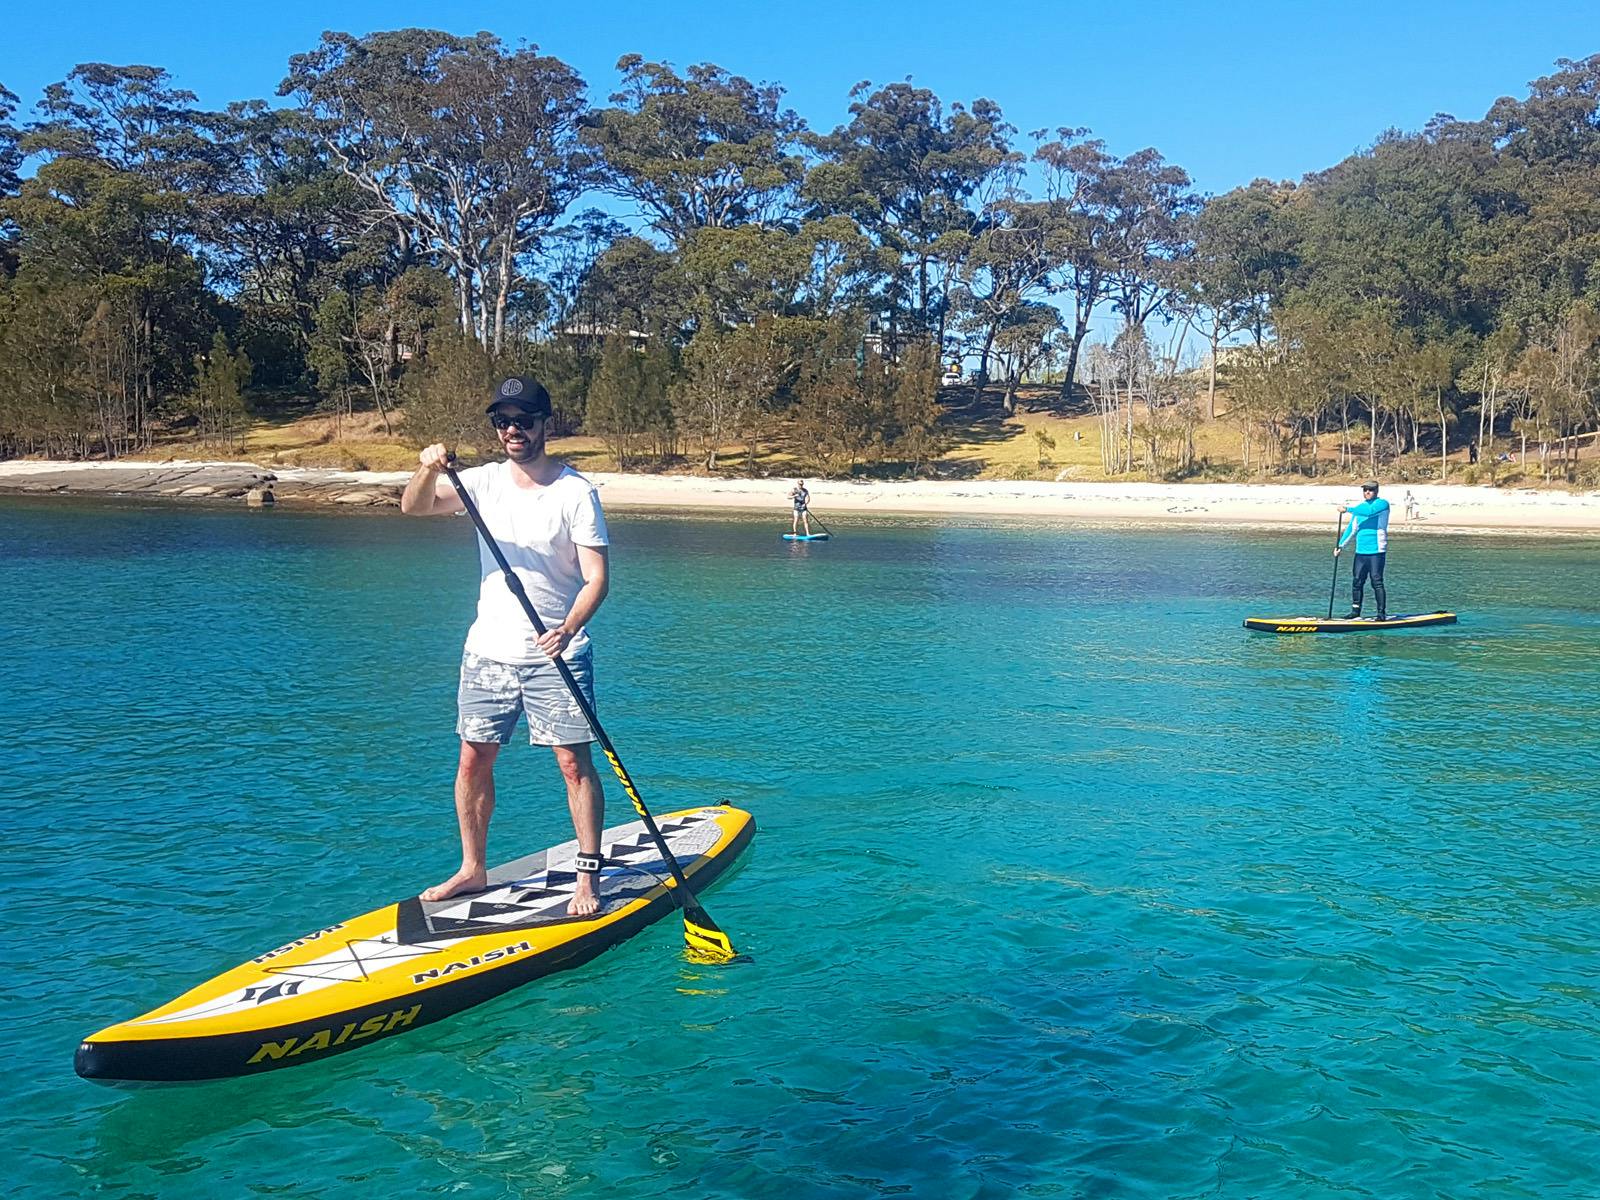 Sup hire directly off the beautiful Shark Net Beach